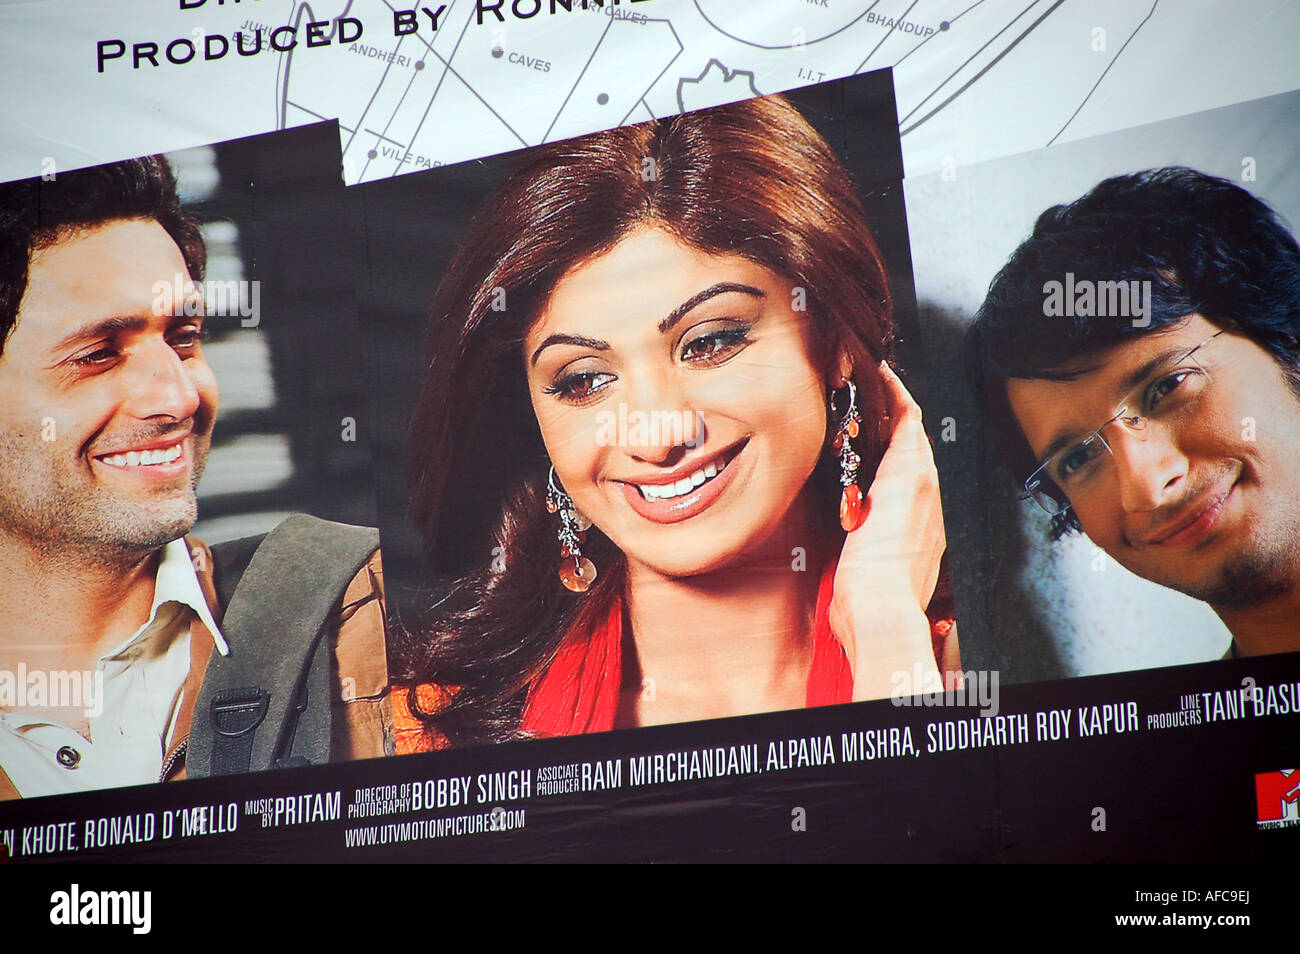 Poster for Bollywood film 'Life in a Metro' featuring Shilpa Shetty, India Stock Photo